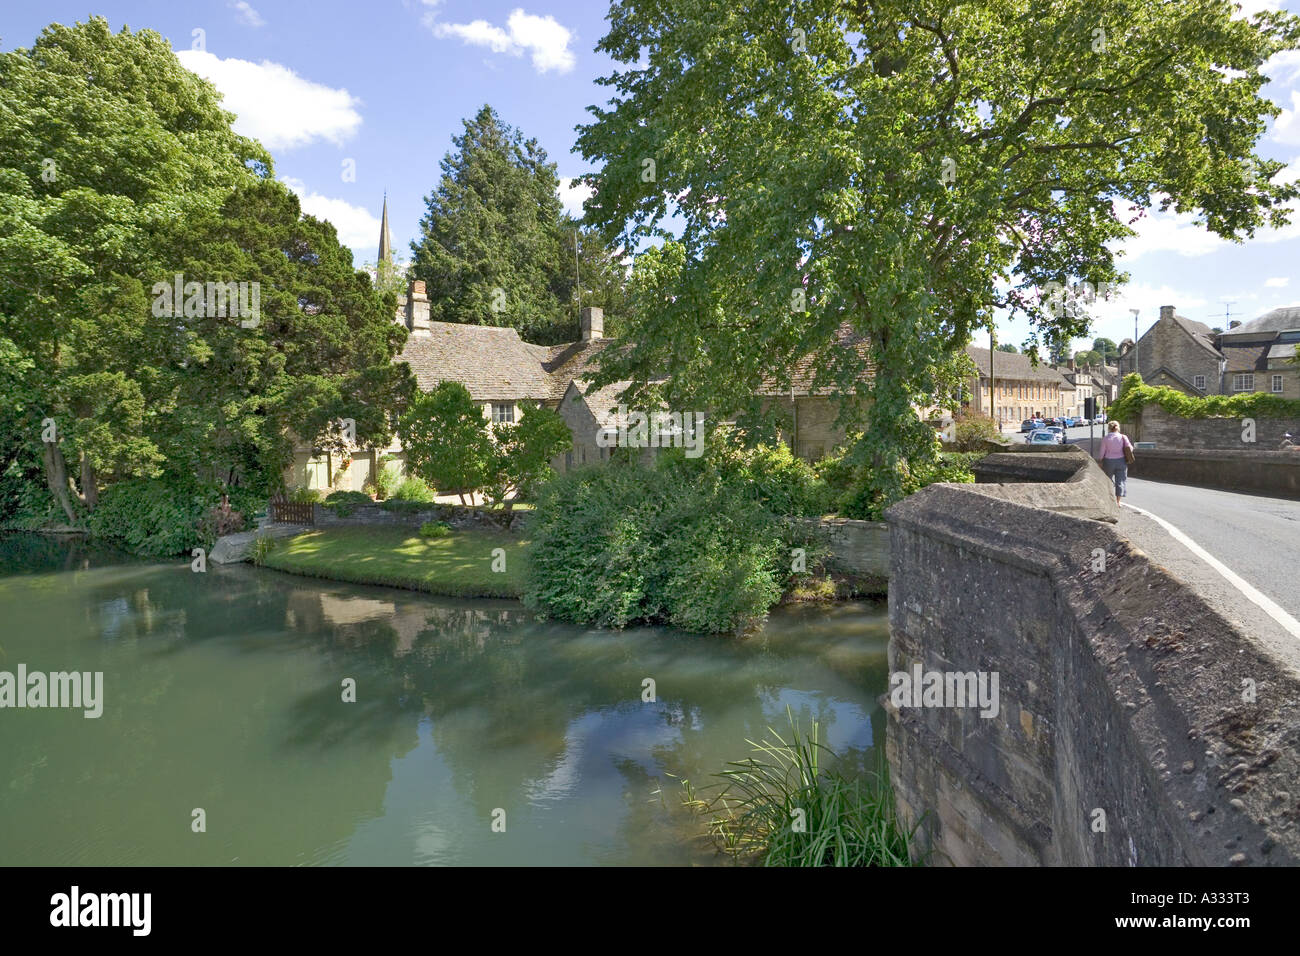 Looking towards the church from the bridge across the River Windrush in the Cotswold town of Burford, Oxfordshire UK Stock Photo